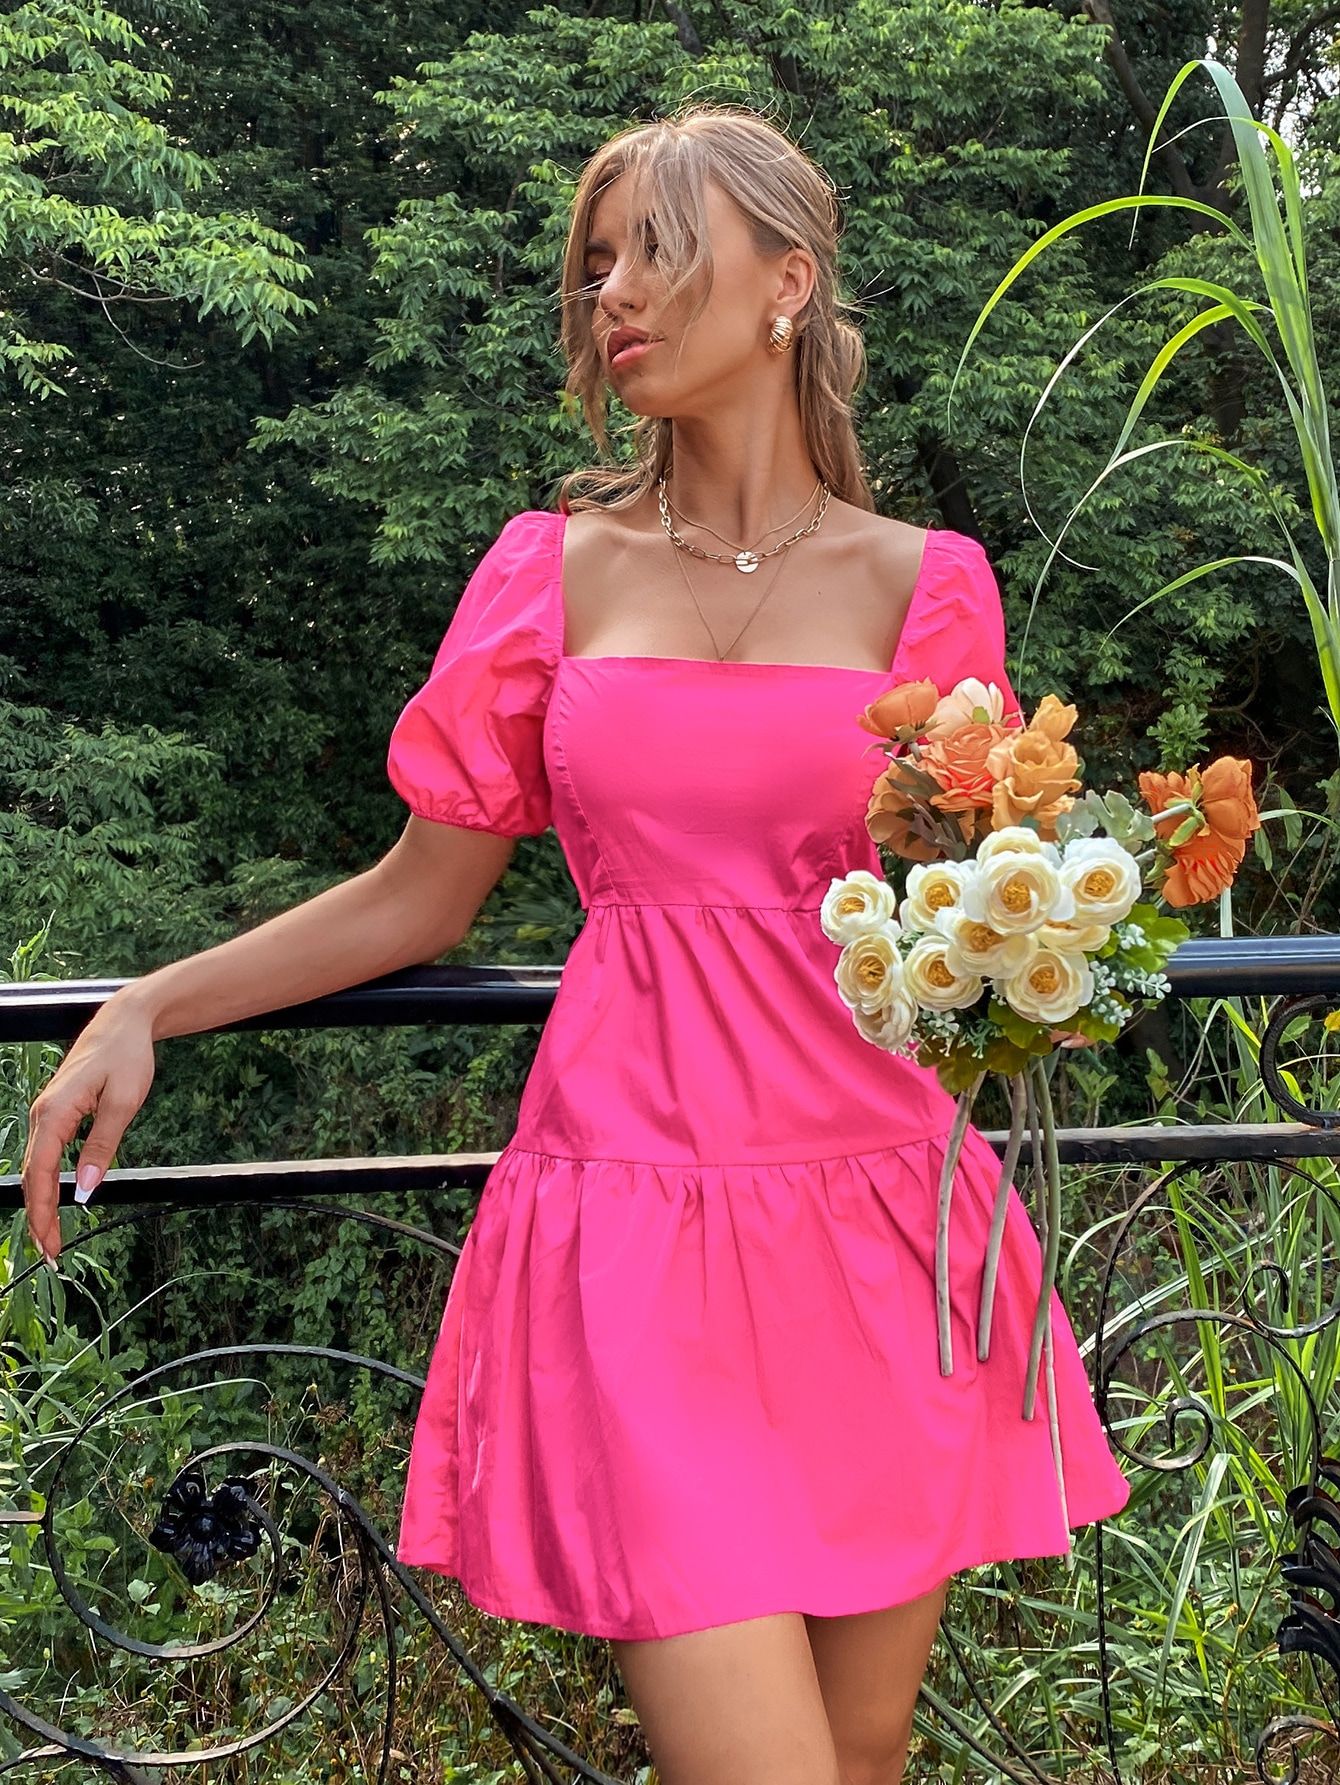 How to Wear Hot Pink Dress: Best 13 Eye Catching Outfit Ideas for Ladies